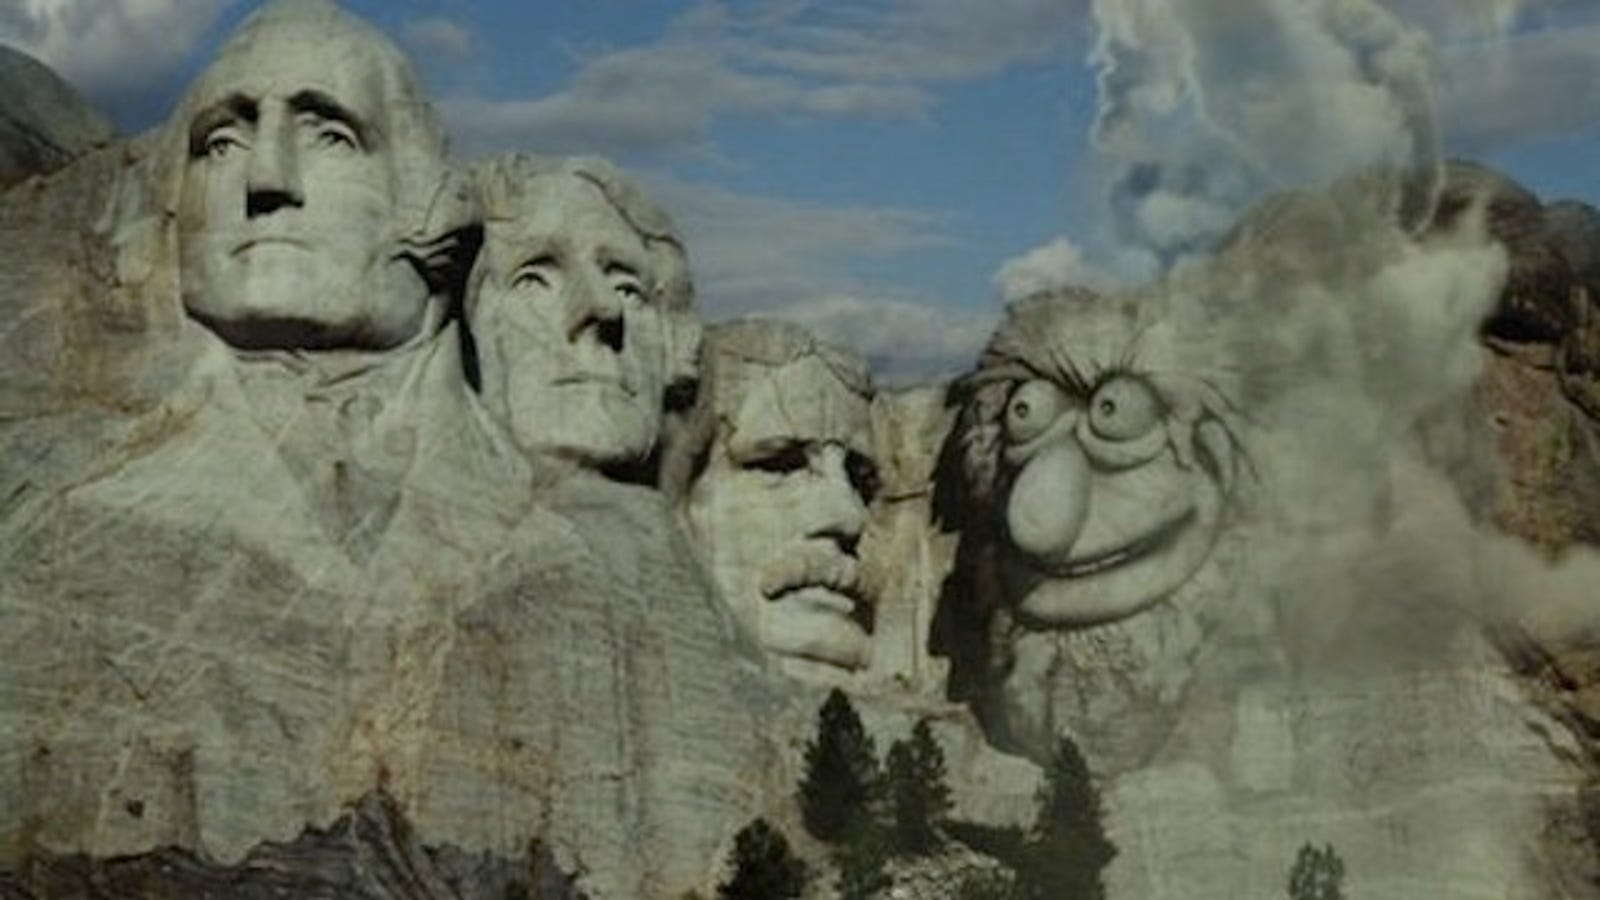 Who defaced Mount Rushmore best?